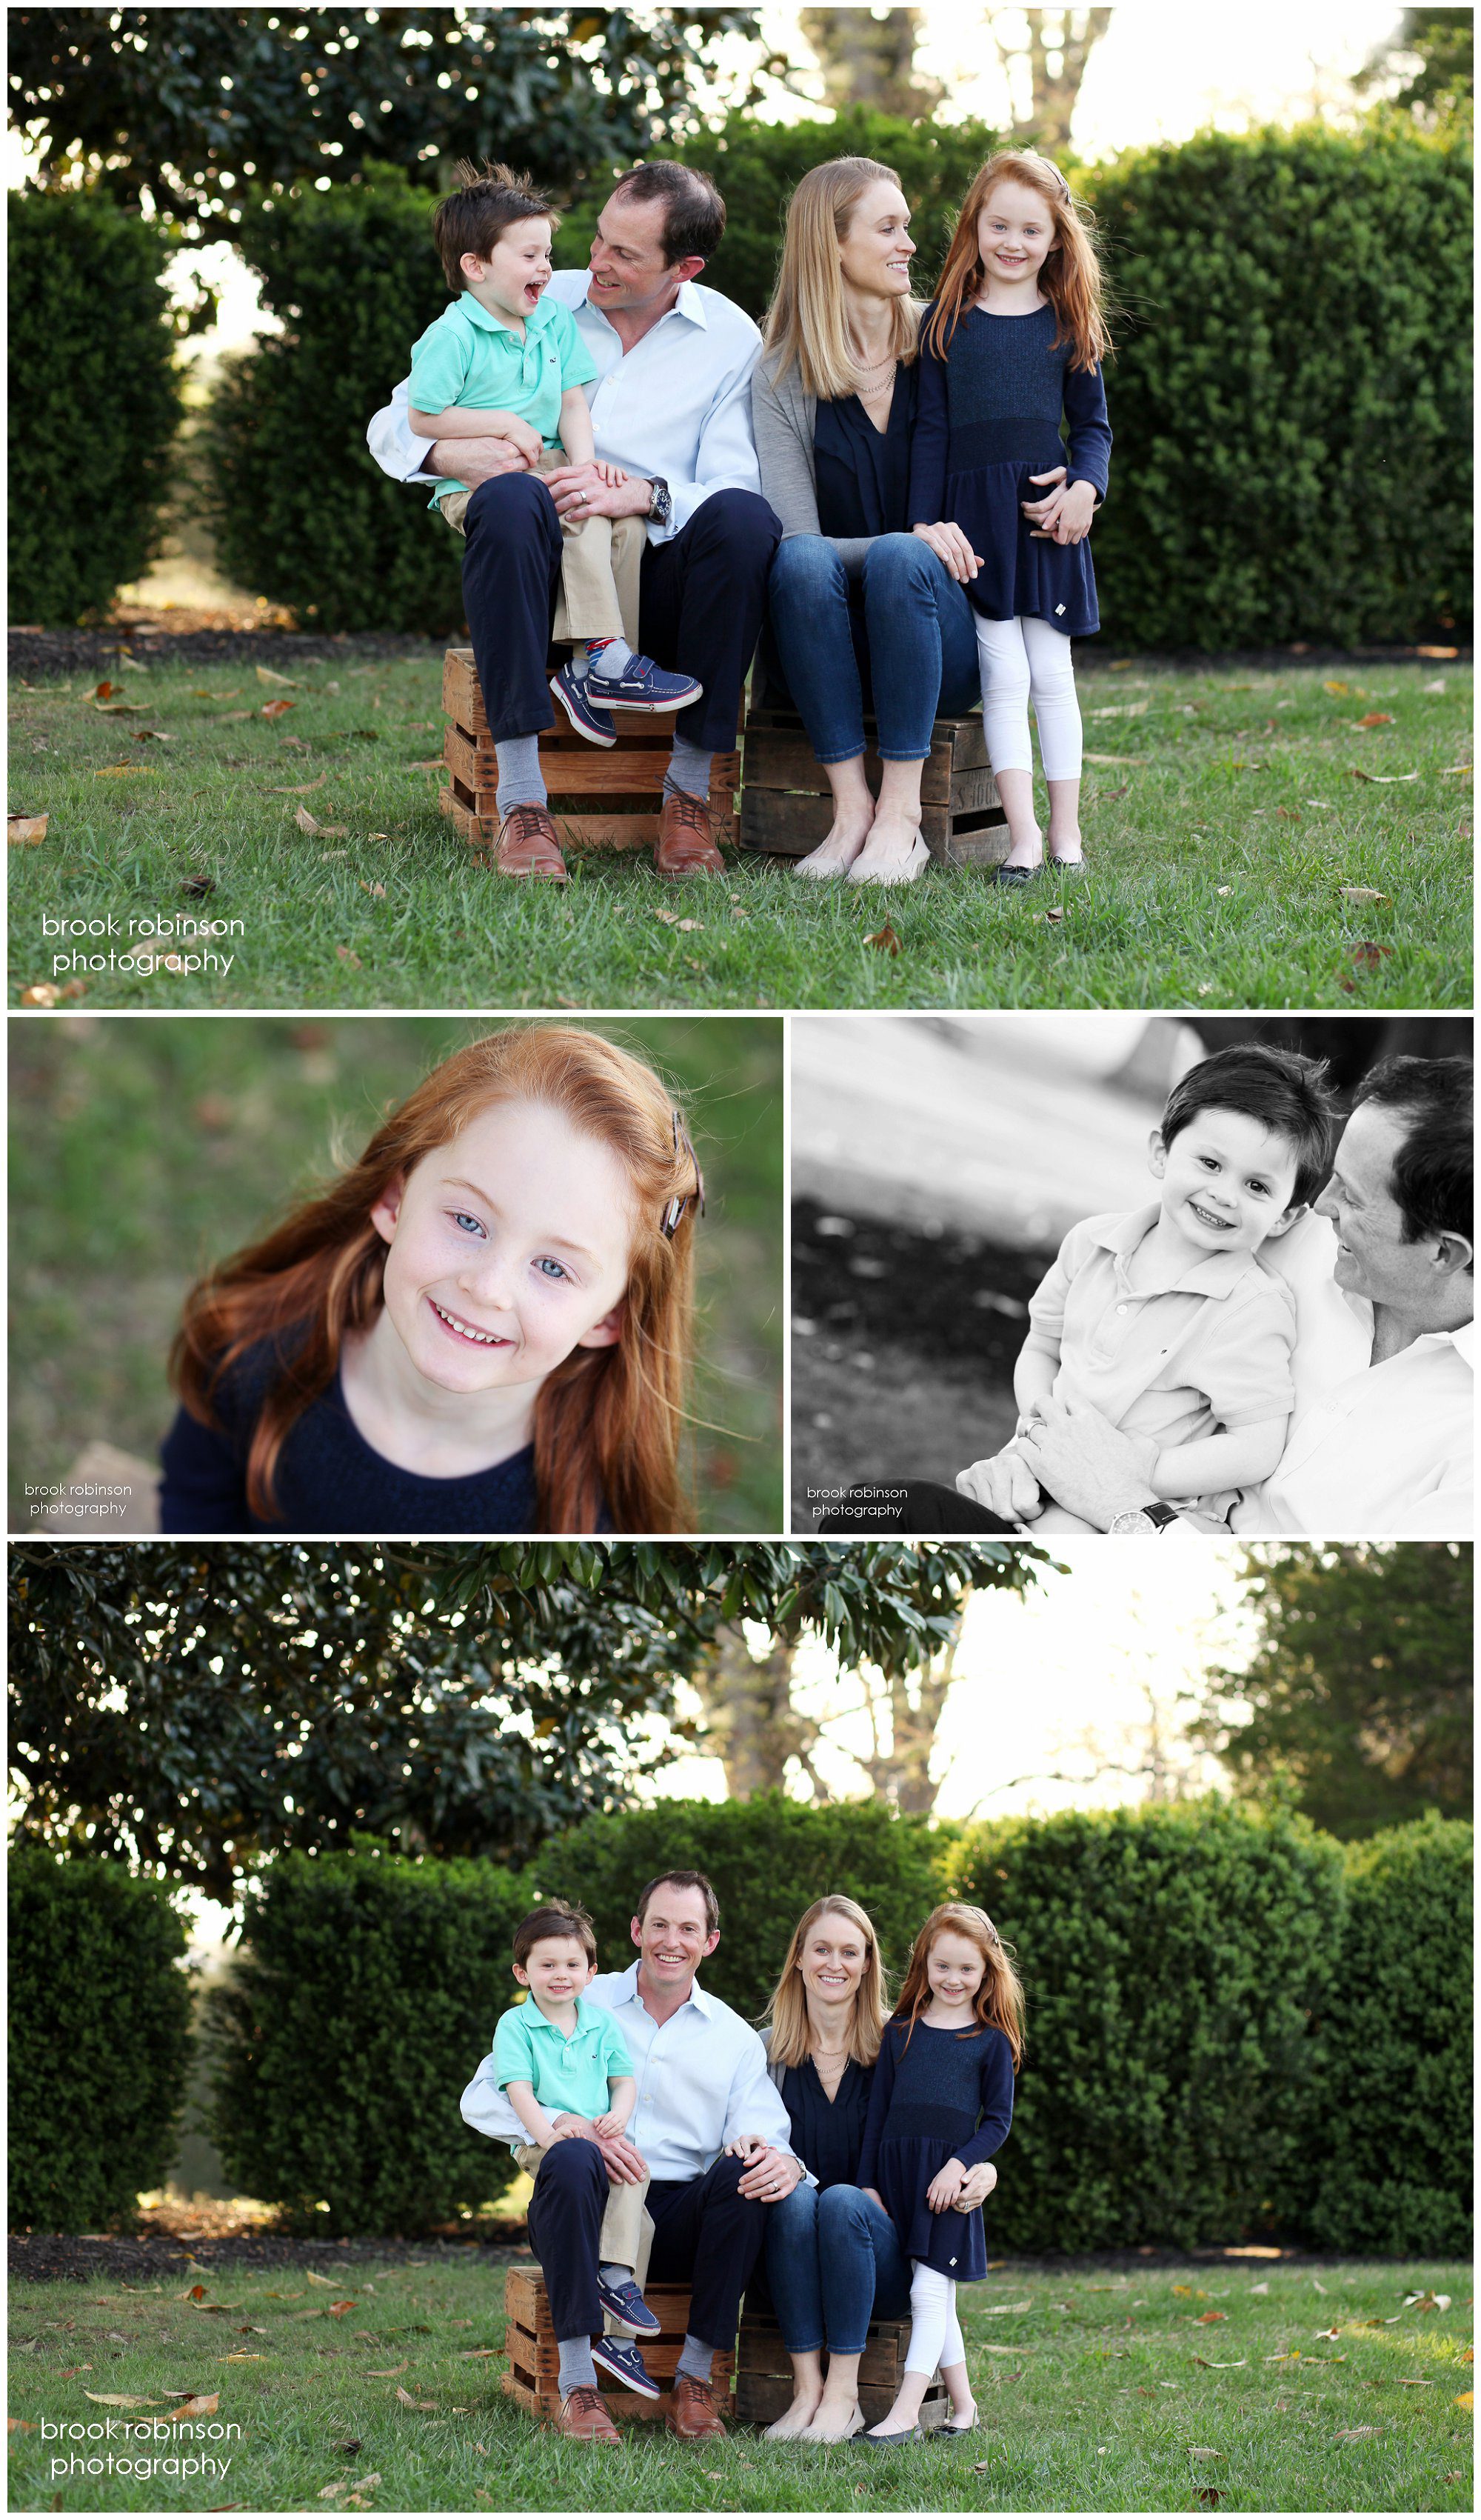 Charlottesville family portraits albemarle county pleasant grove fluvanna rugby uva virginia sunset sillhouette springtime siblings.